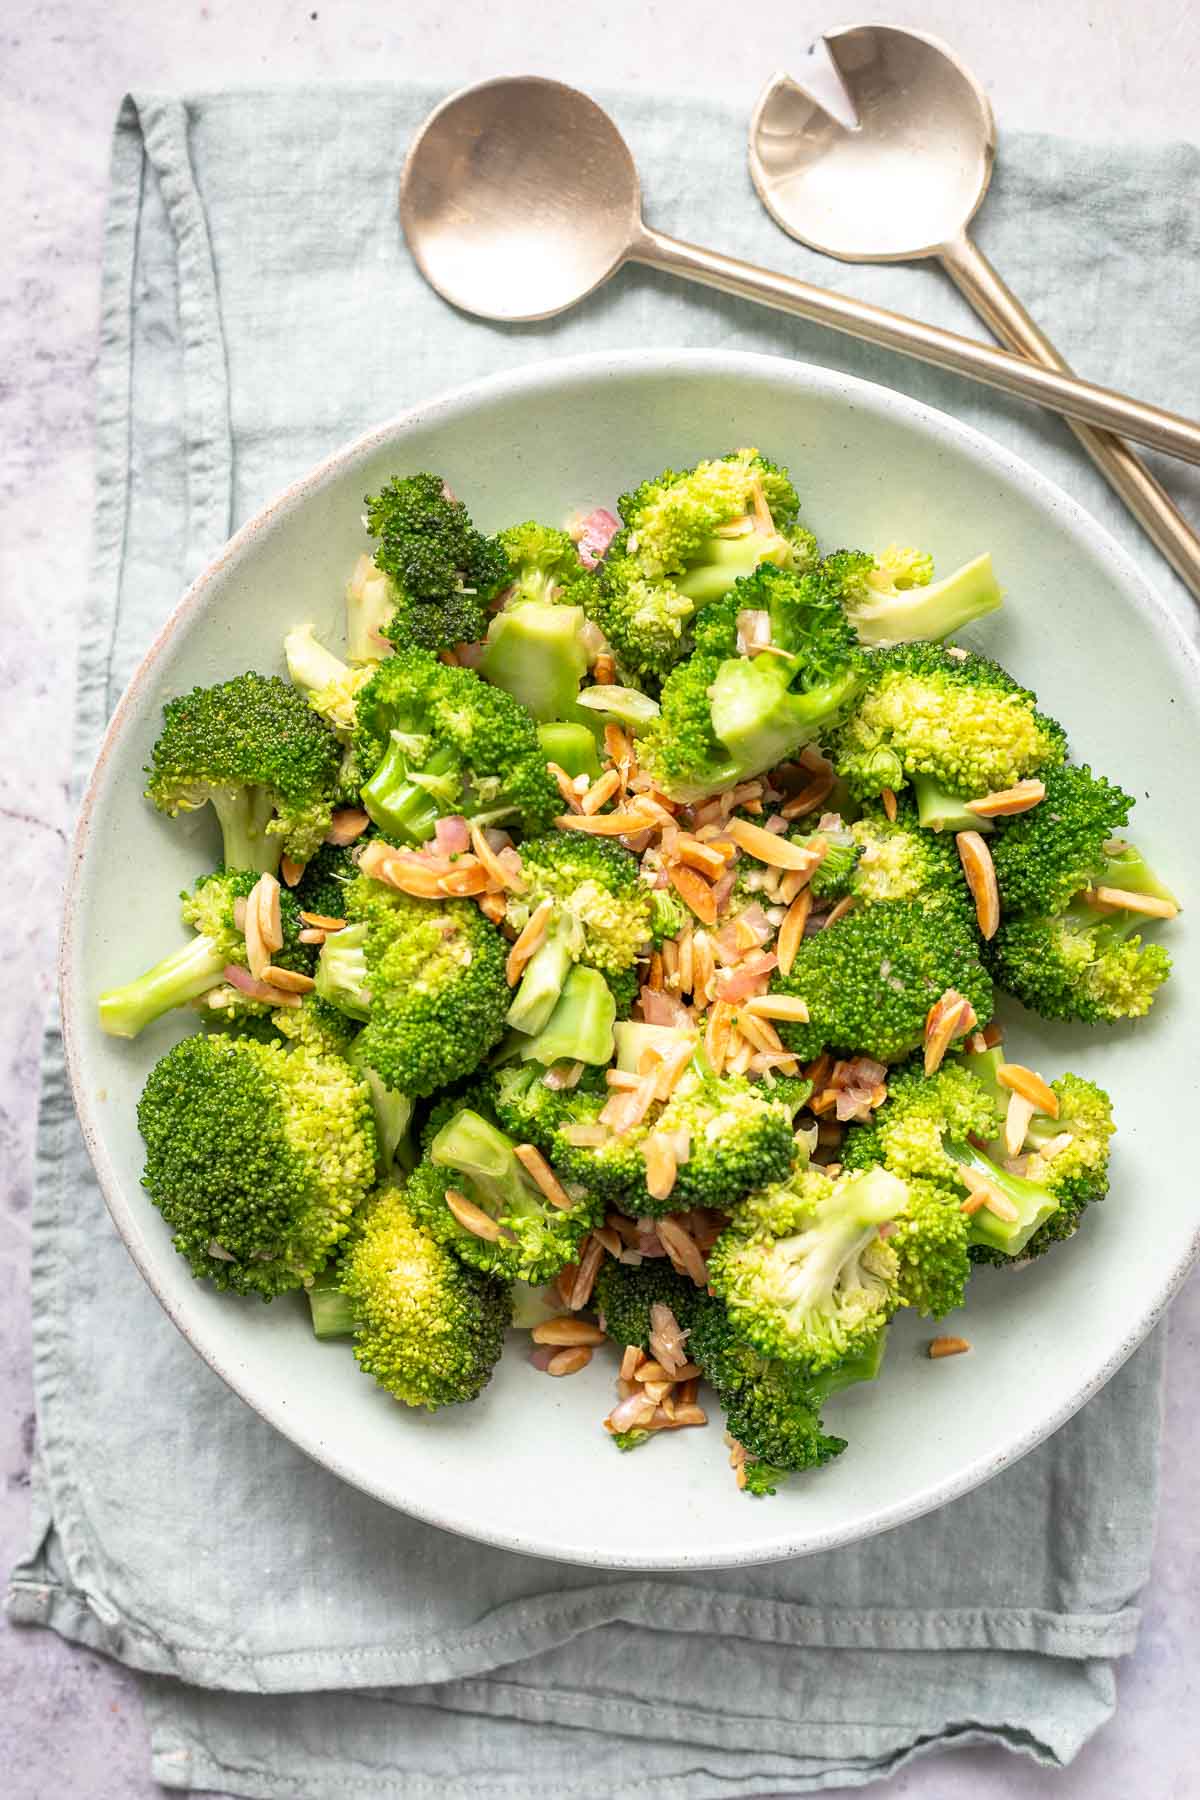 Asian-Style Broccoli Salad with miso paste and almonds